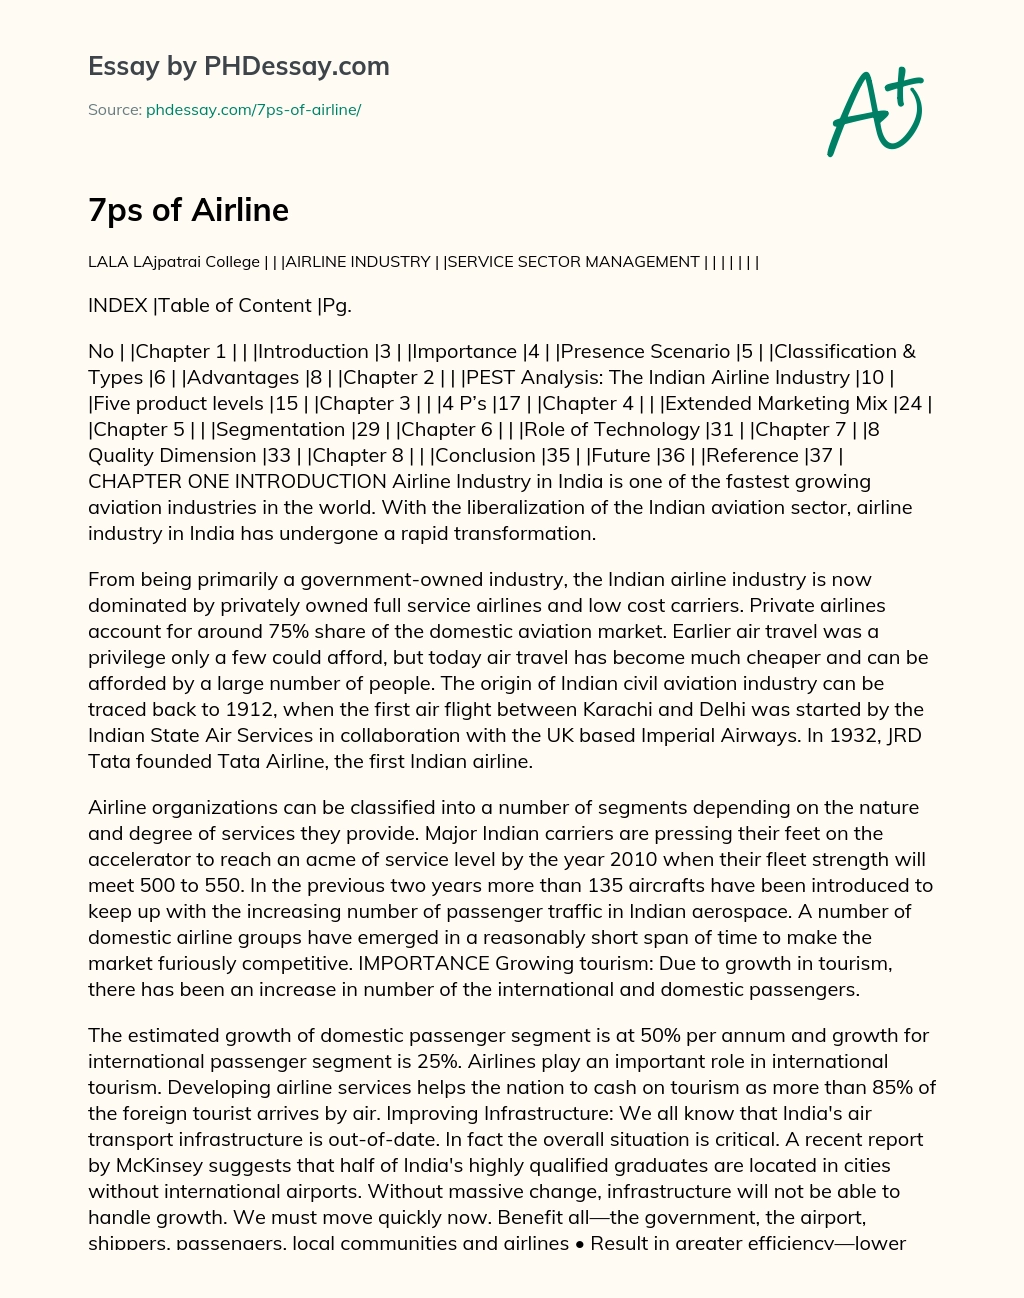 7ps of Airline essay